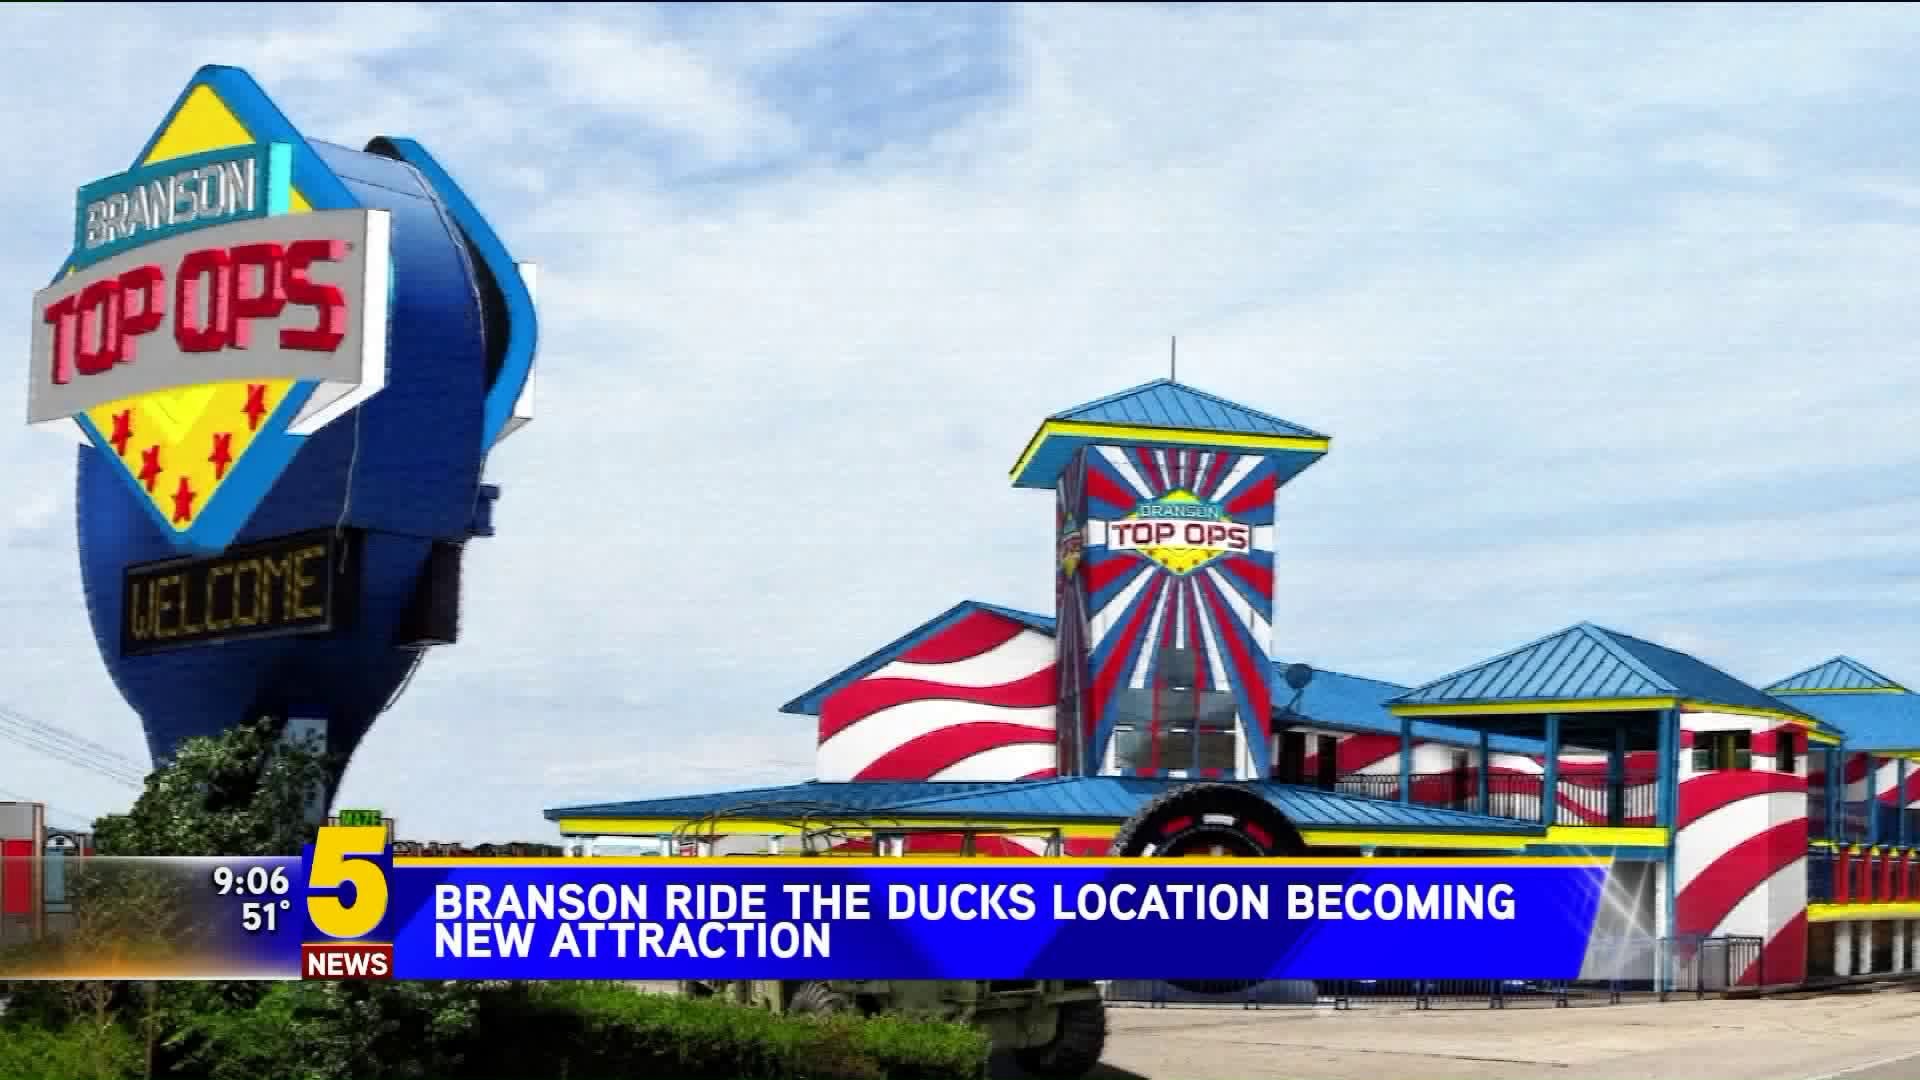 Branson Ride The Ducks Location Becoming New Attraction